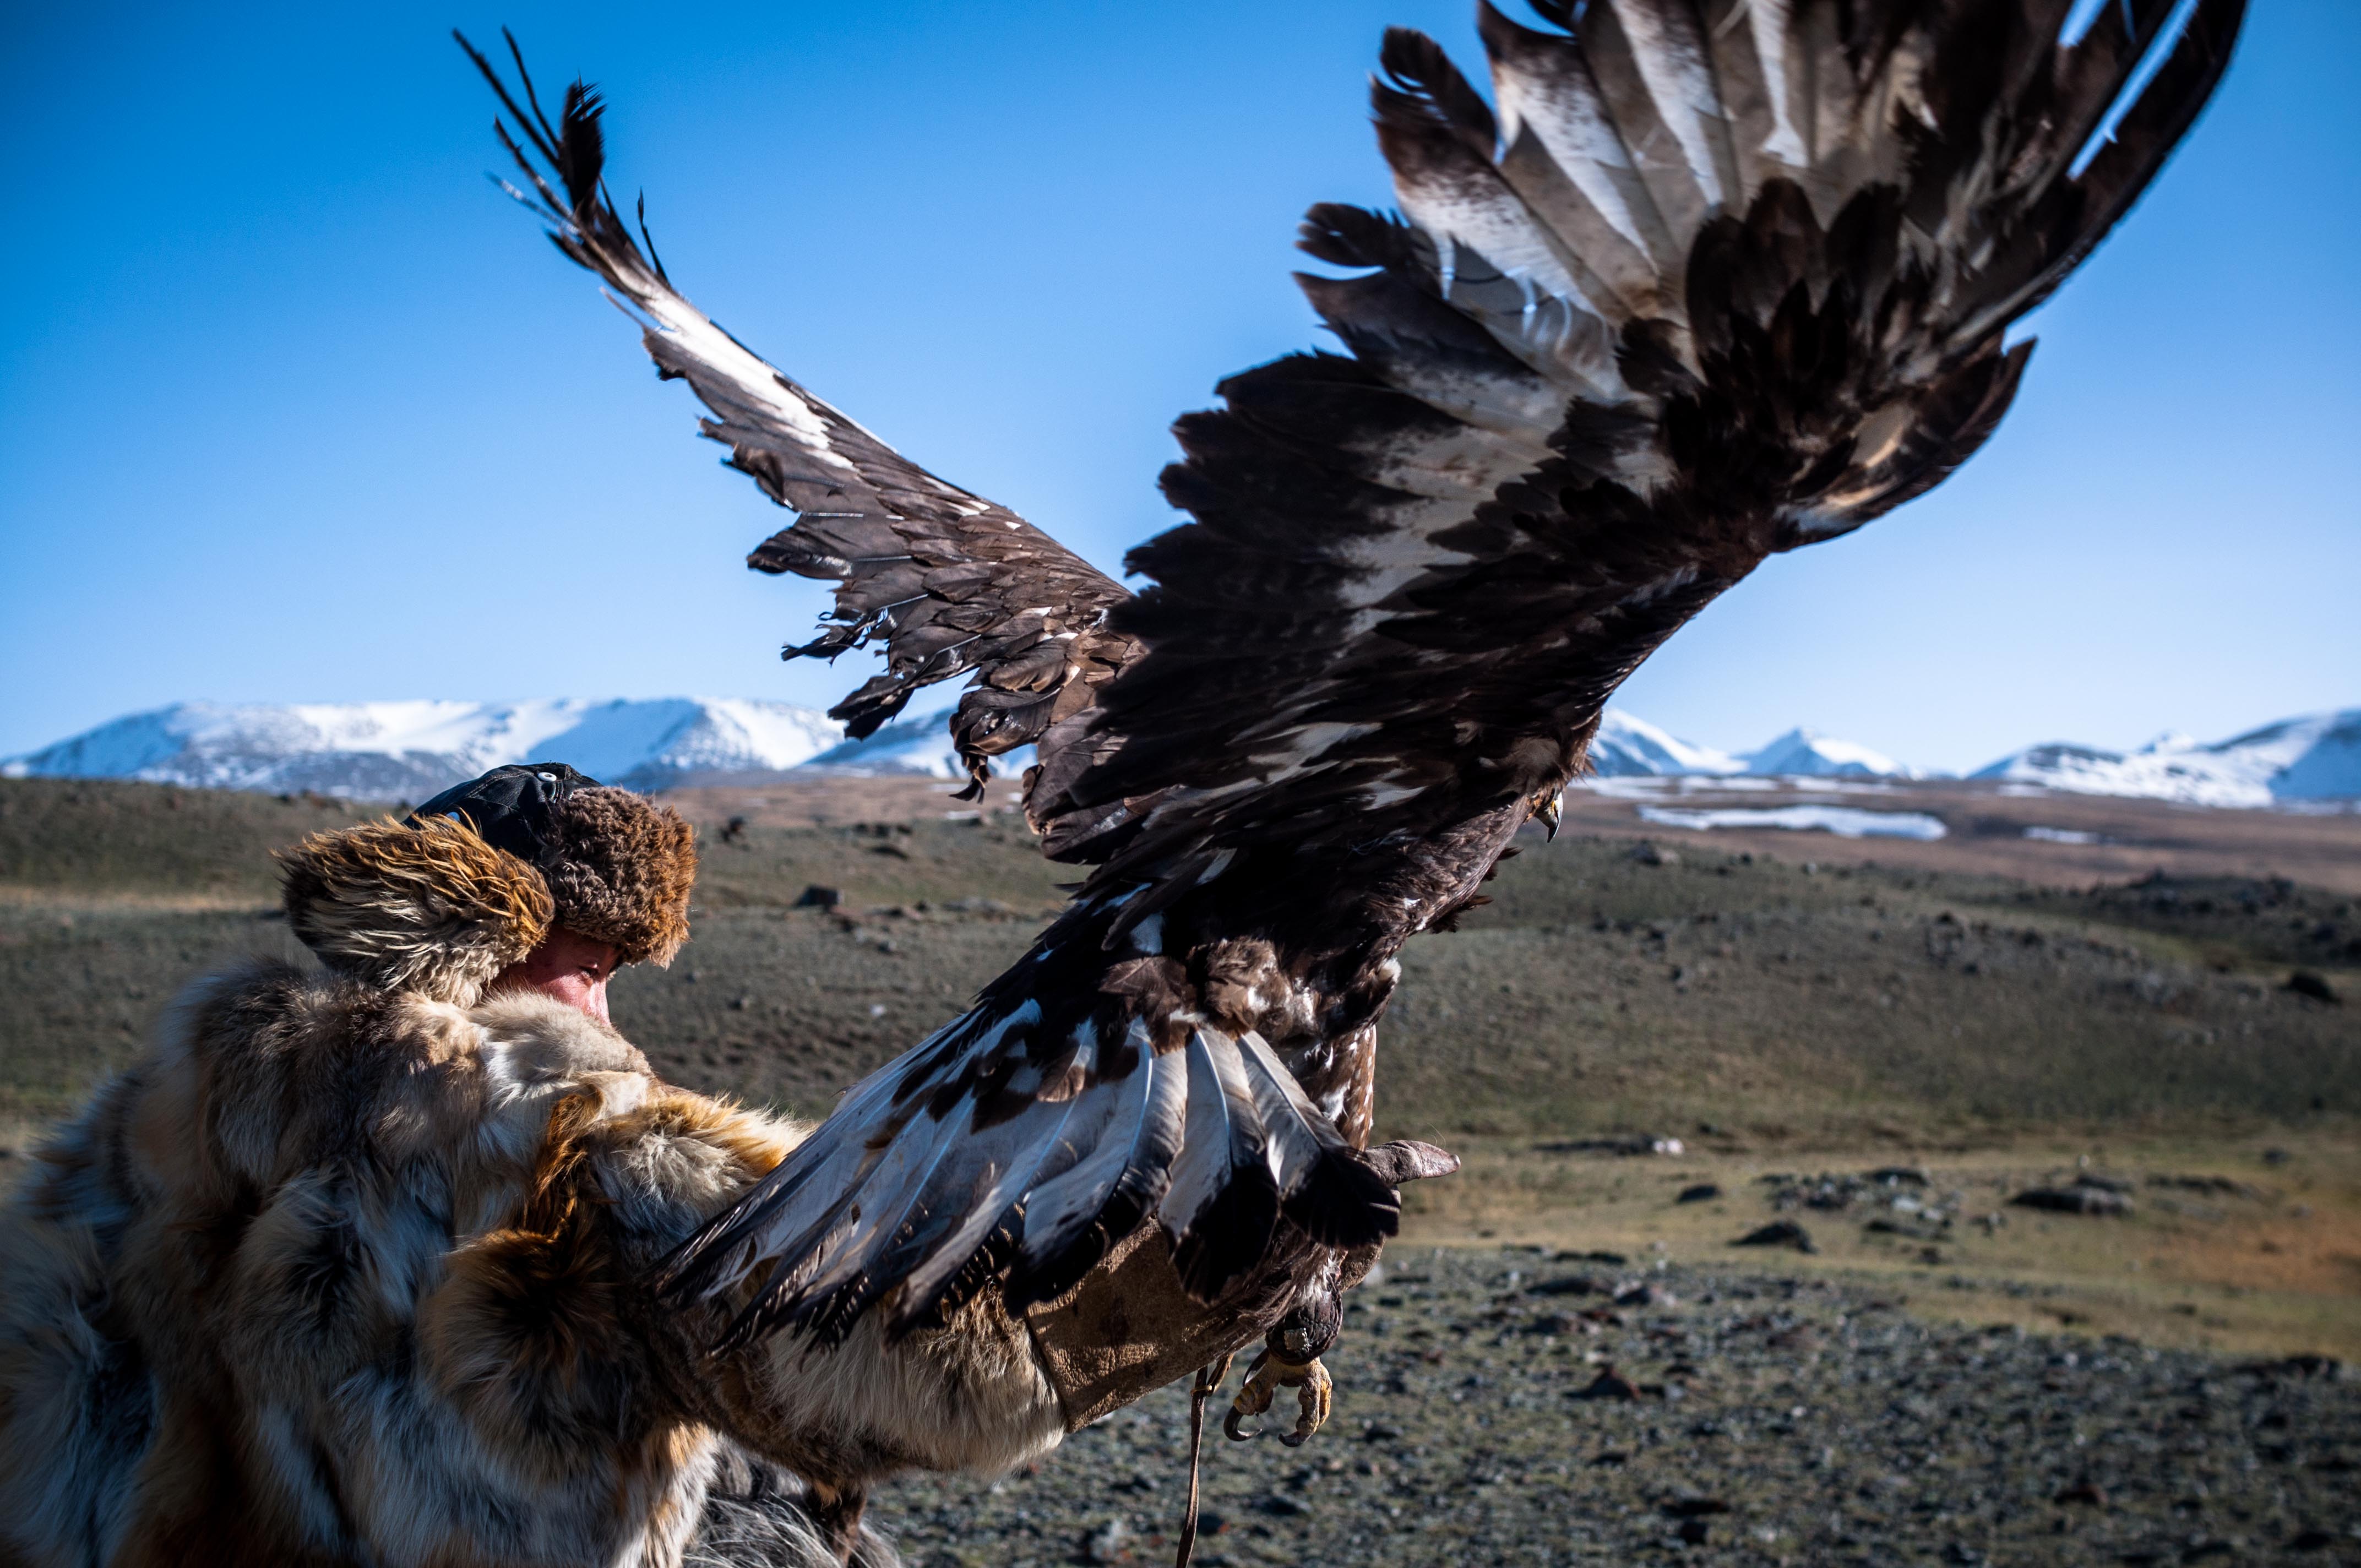 A fox makes a run for it as Esen unleashes his golden eagle - taking flight in pursuit. Among him and his brothers, Esen is the only one who has taken enough interest to train his own eagles and go on week-long hunting trips.